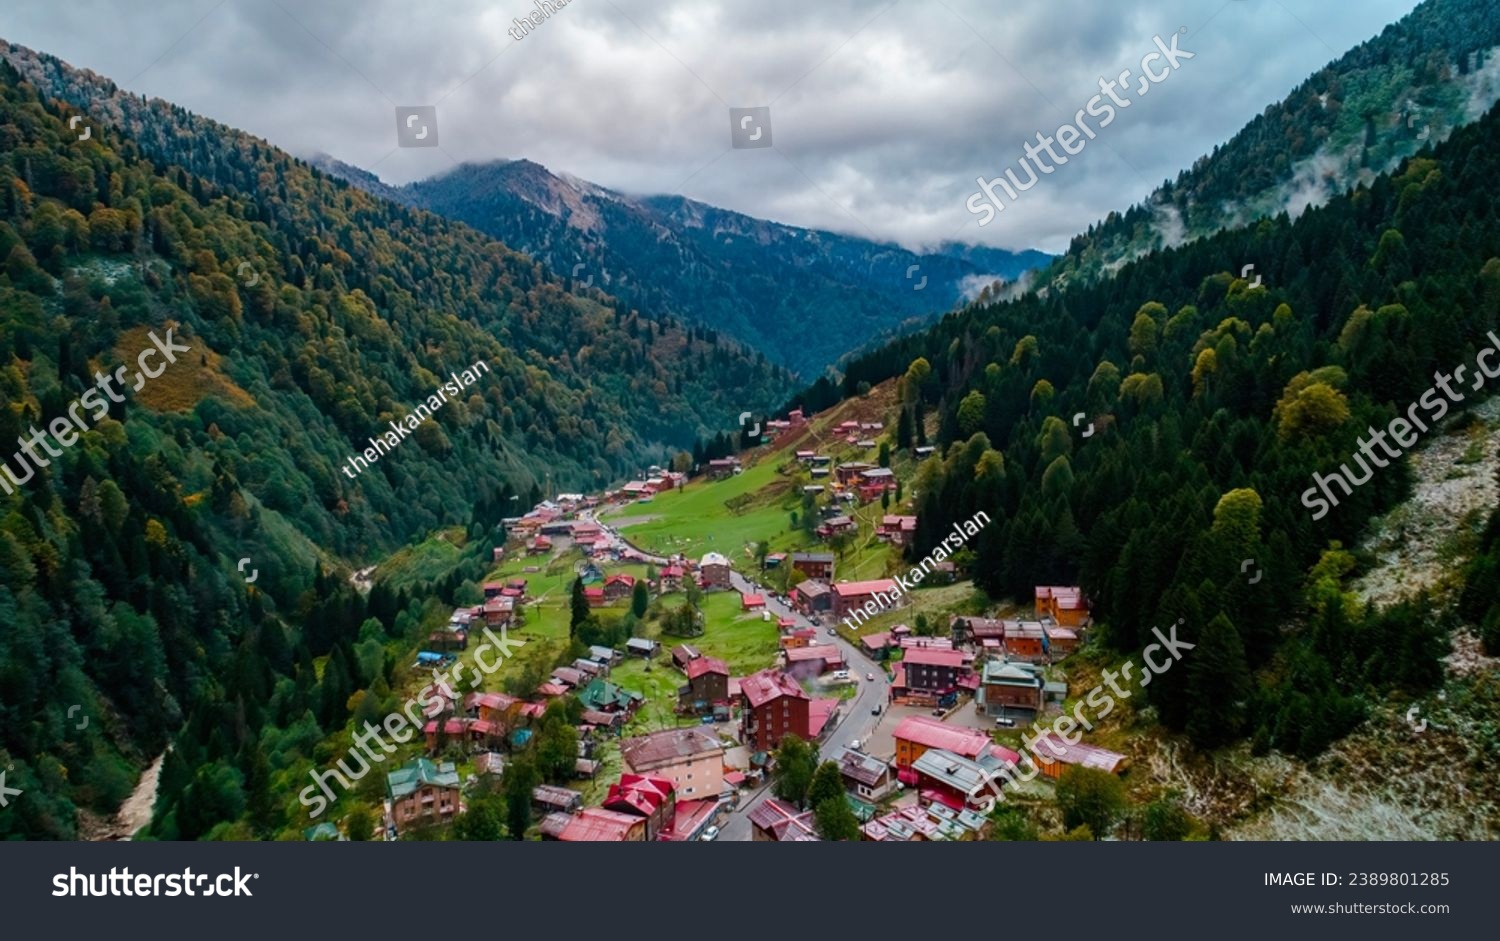 Aerial view of Ayder Plateau in Camlihemsin. Rize, Turkey. #2389801285